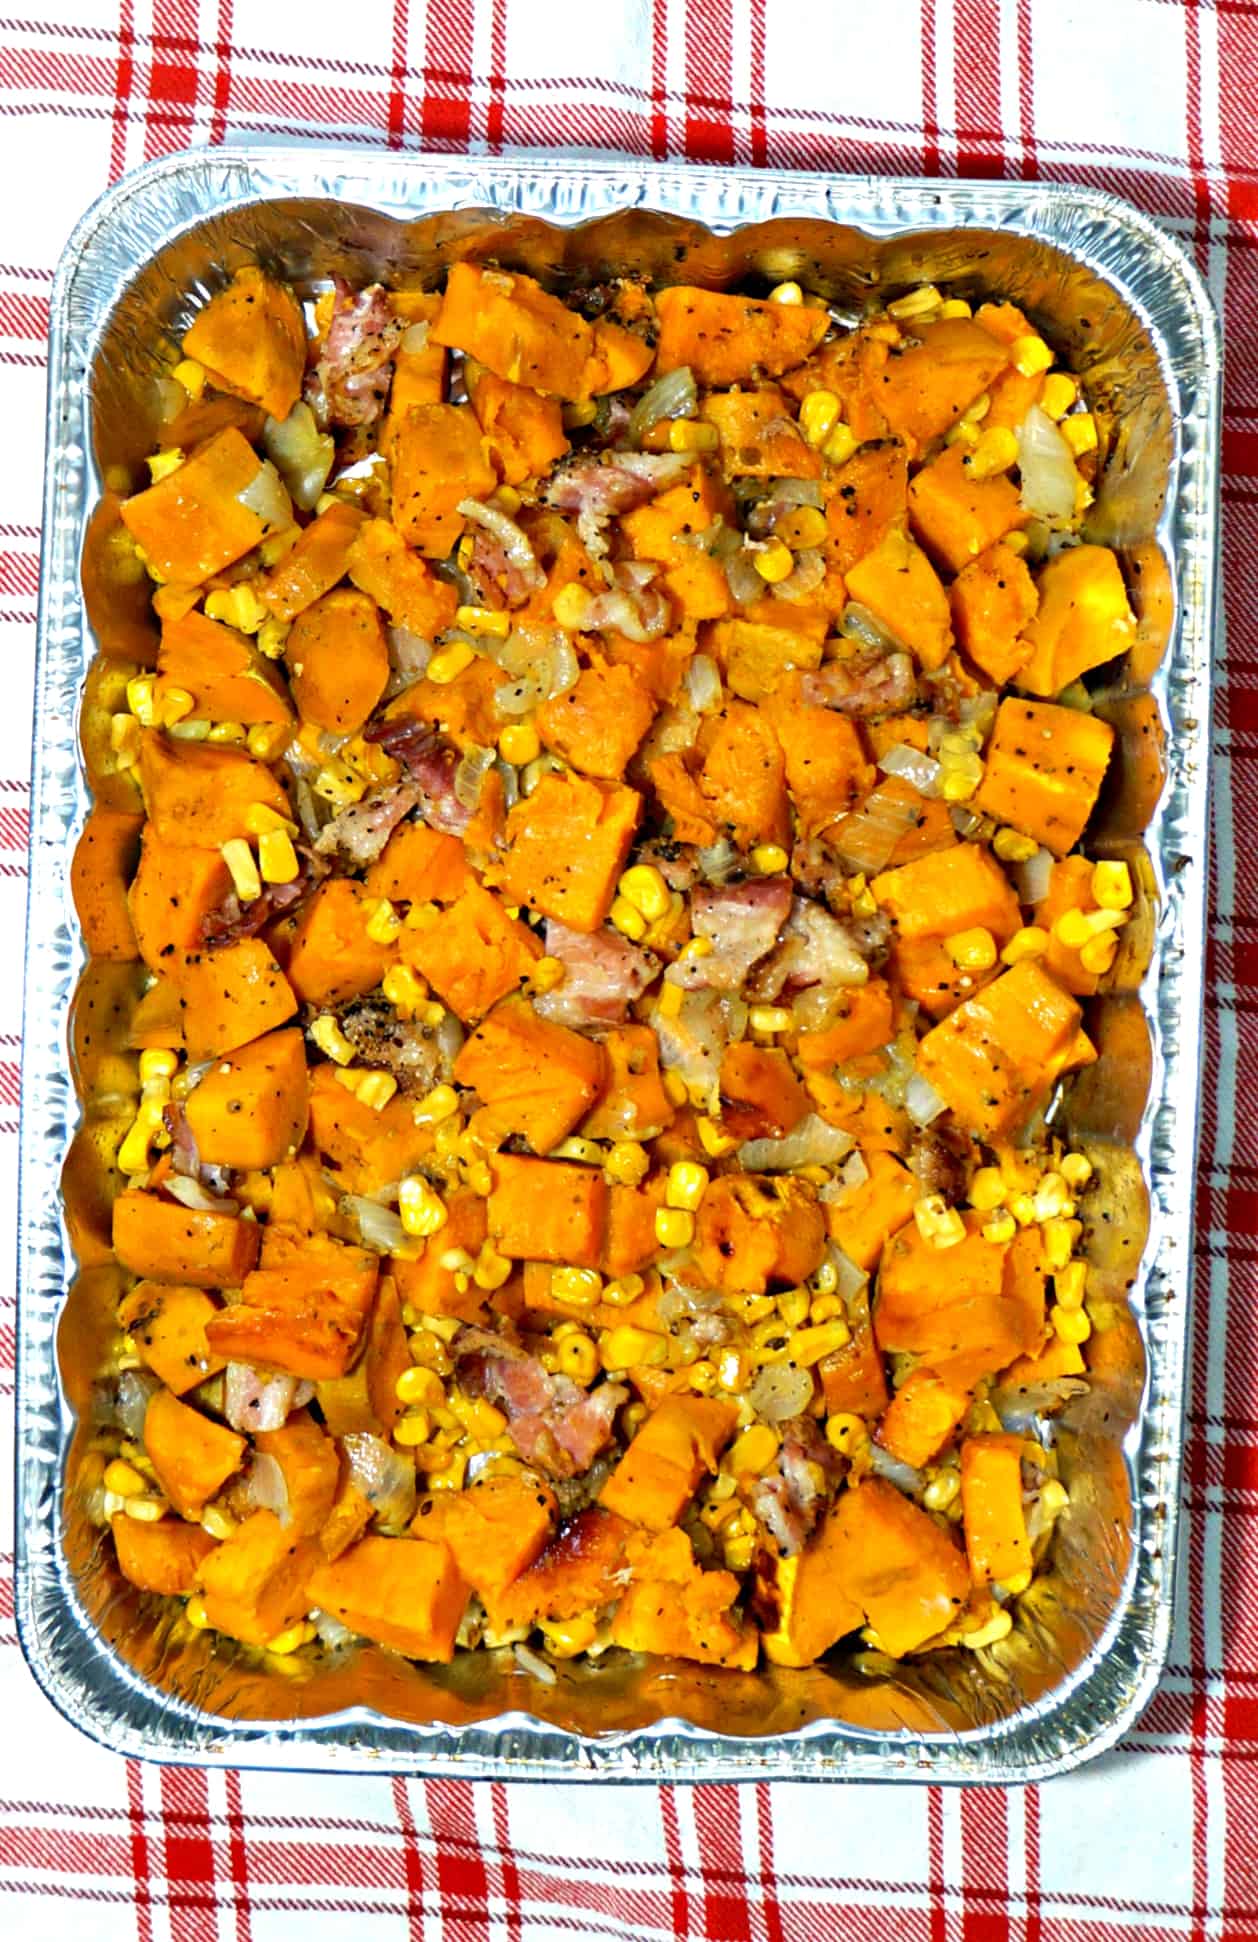 Grilled Sweet Potatoes with Bacon, Onions and Corn. BBQ side dish. Grilled veggies.